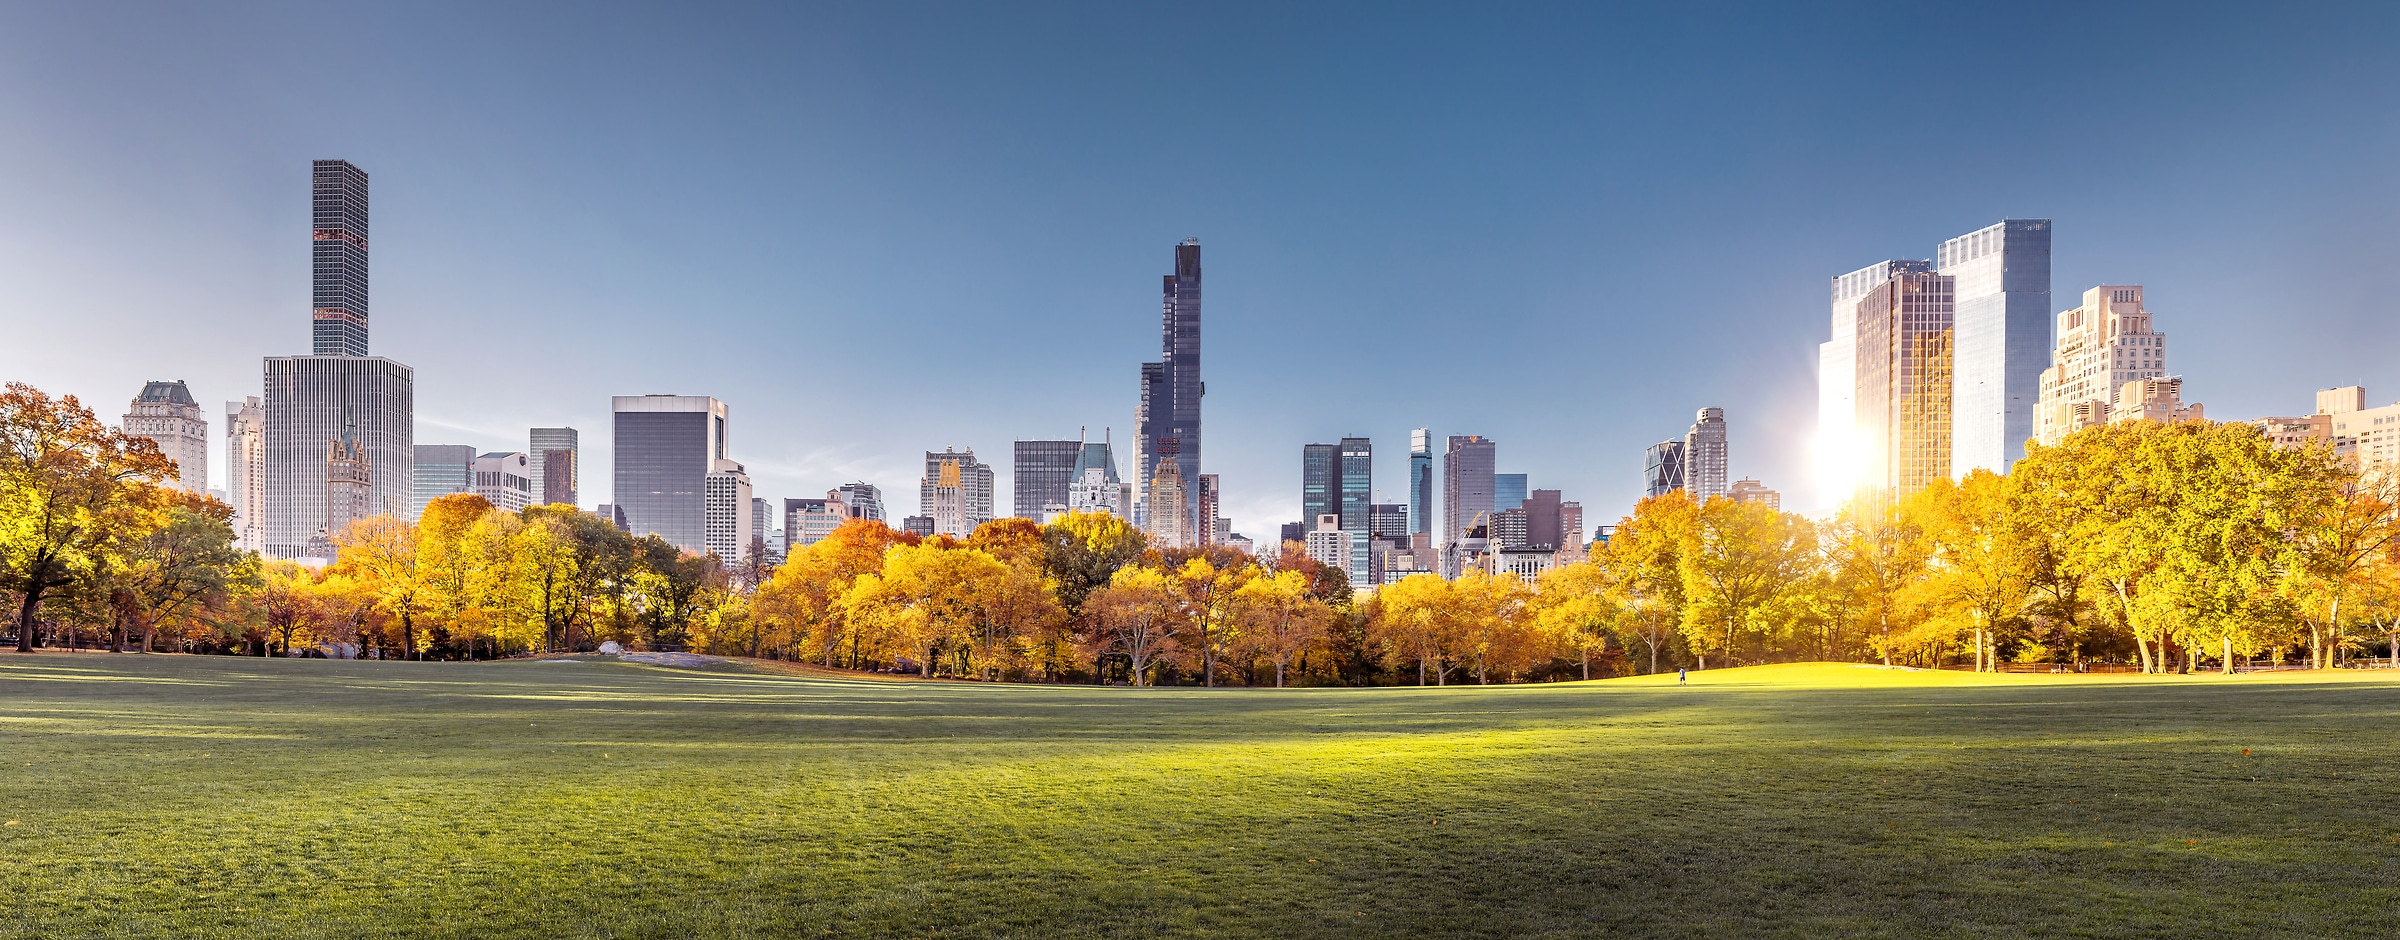 160 megapixels! A very high resolution landscape VAST photo of Sheep Meadow and the Manhattan skyline in Central Park at sunrise during autumn; created in New York City by Dan Piech